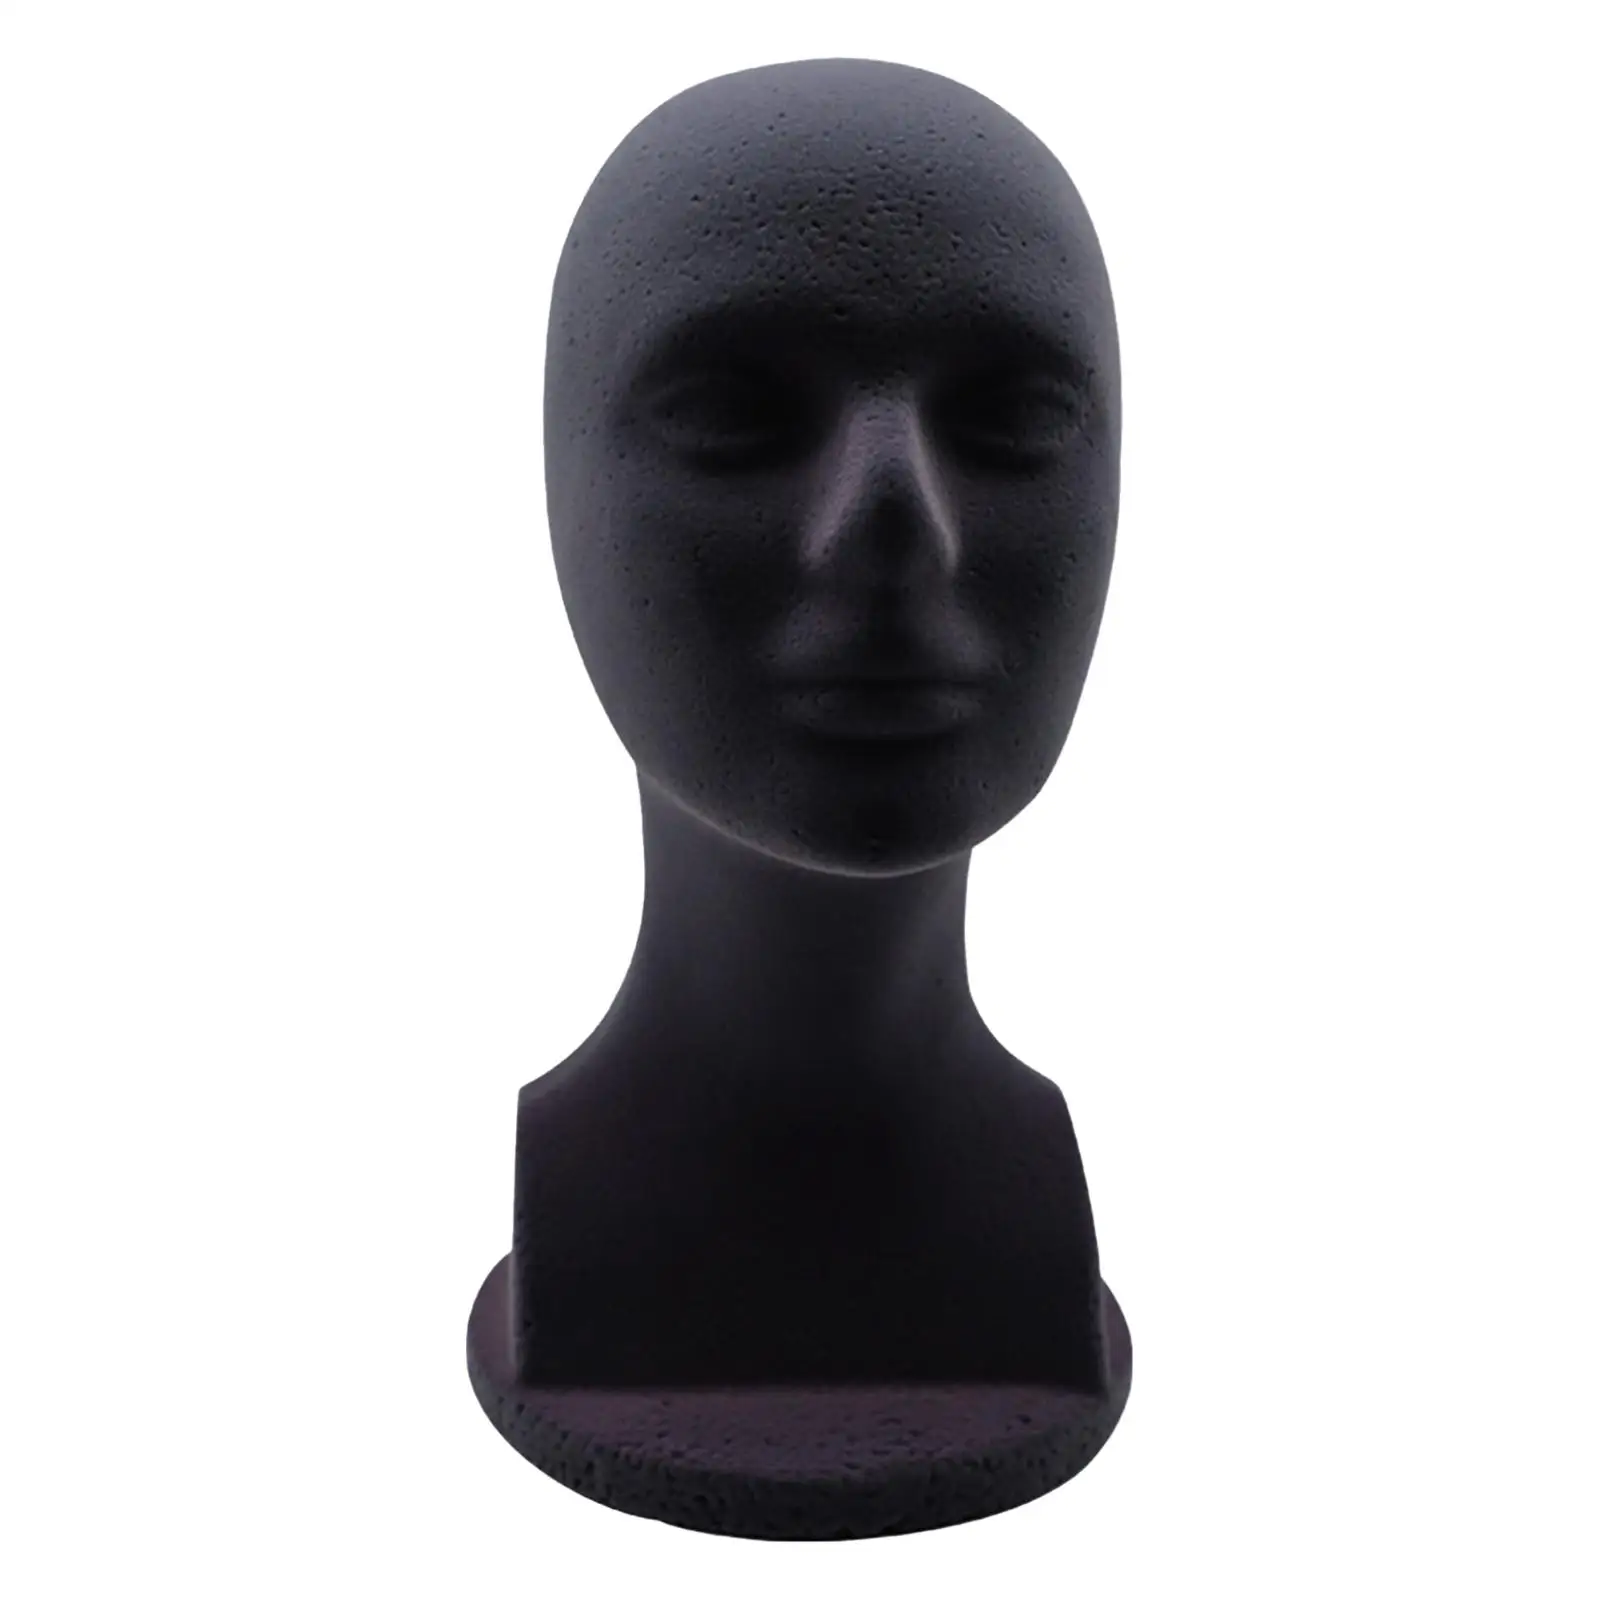 Man Styrofoam Mannequin Head Model Hat Display Stand Black Multi Functional for Professional or Personal Use Sturdy Stable Base